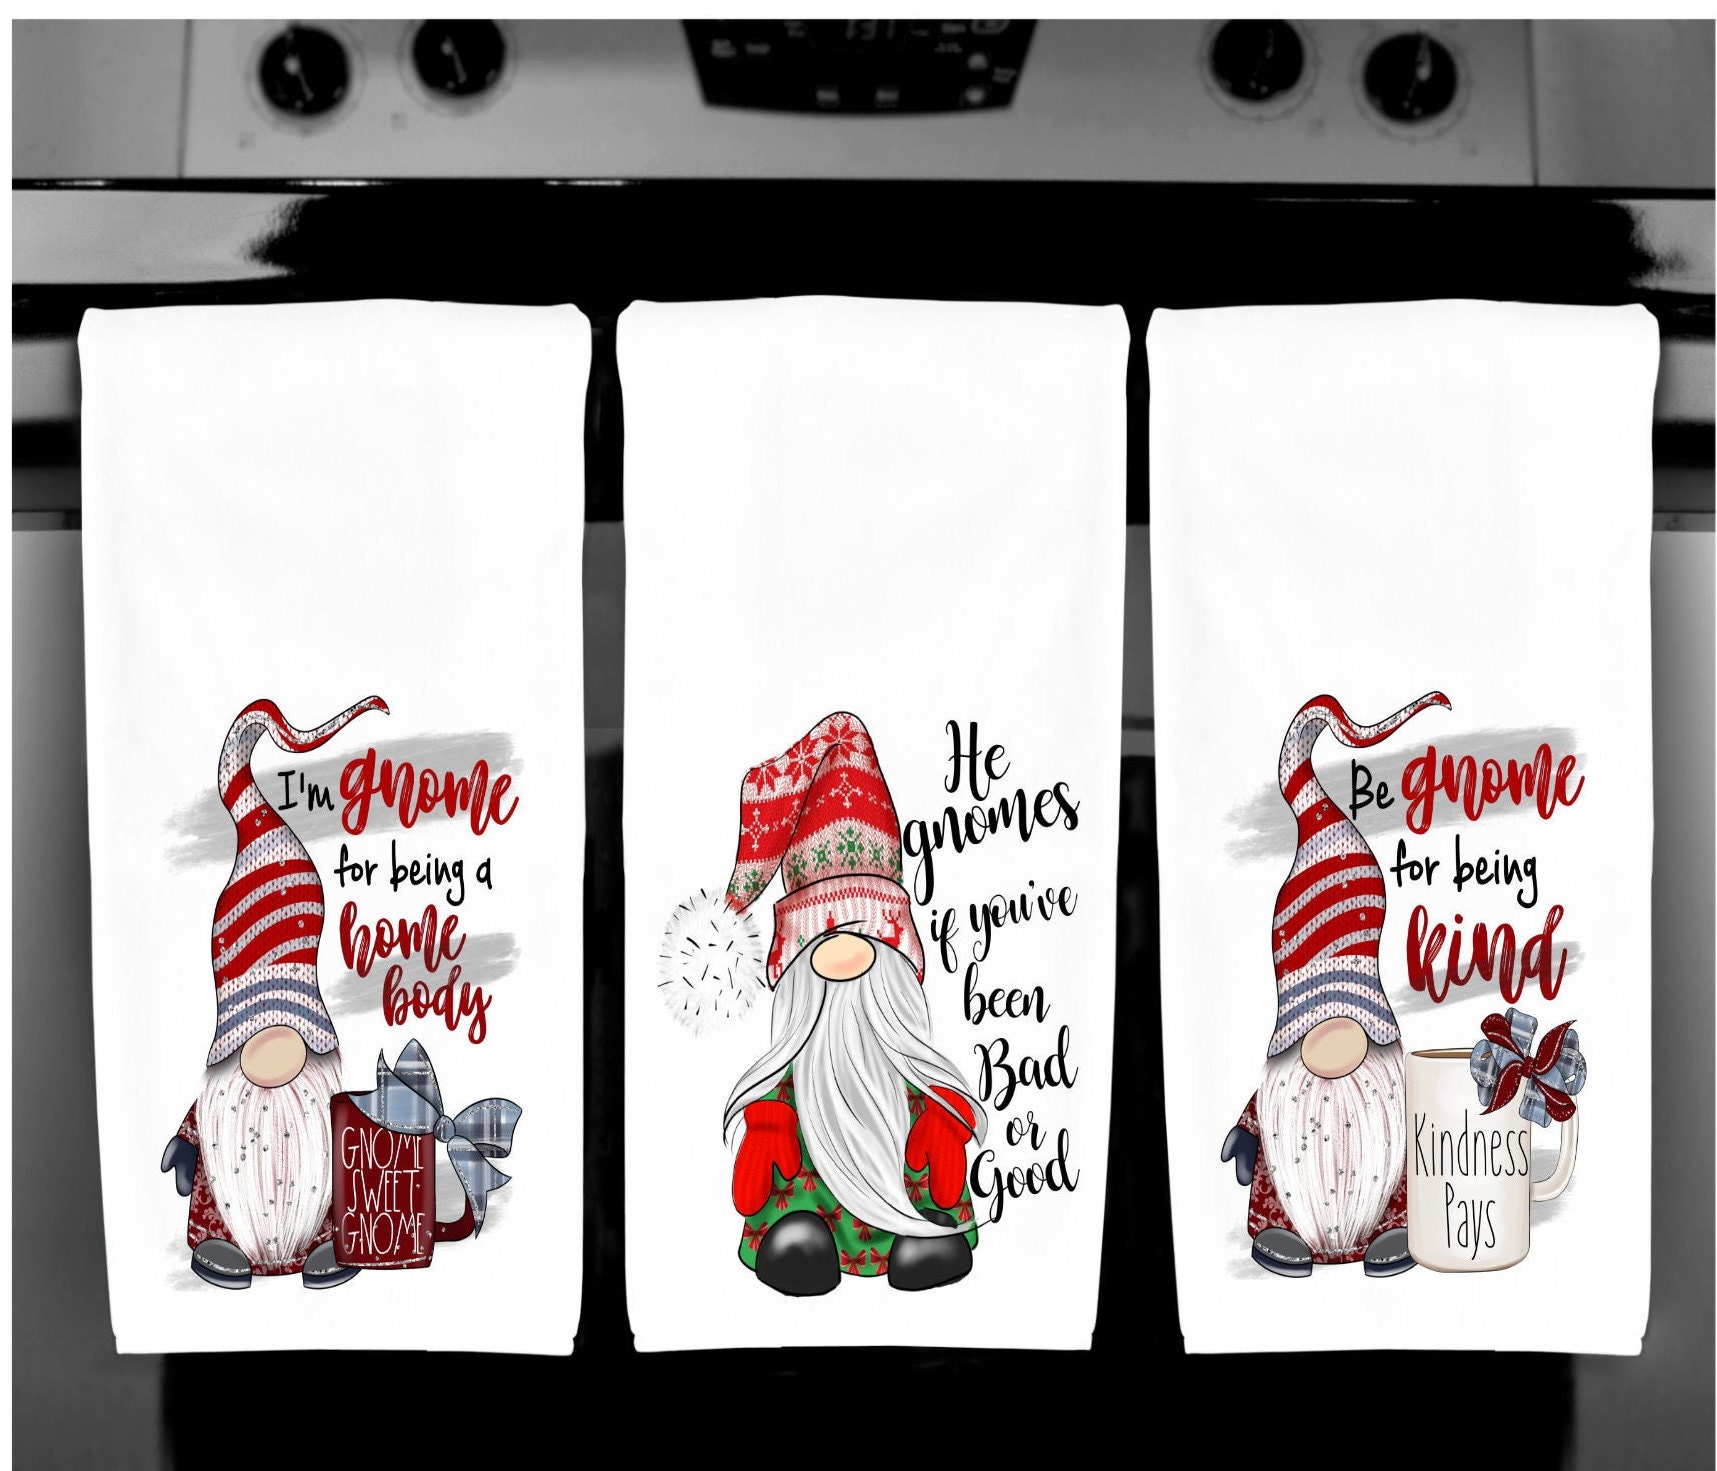 Buy Can You Spare a Square Waffle Weave Hand Towel. Gnomes Online